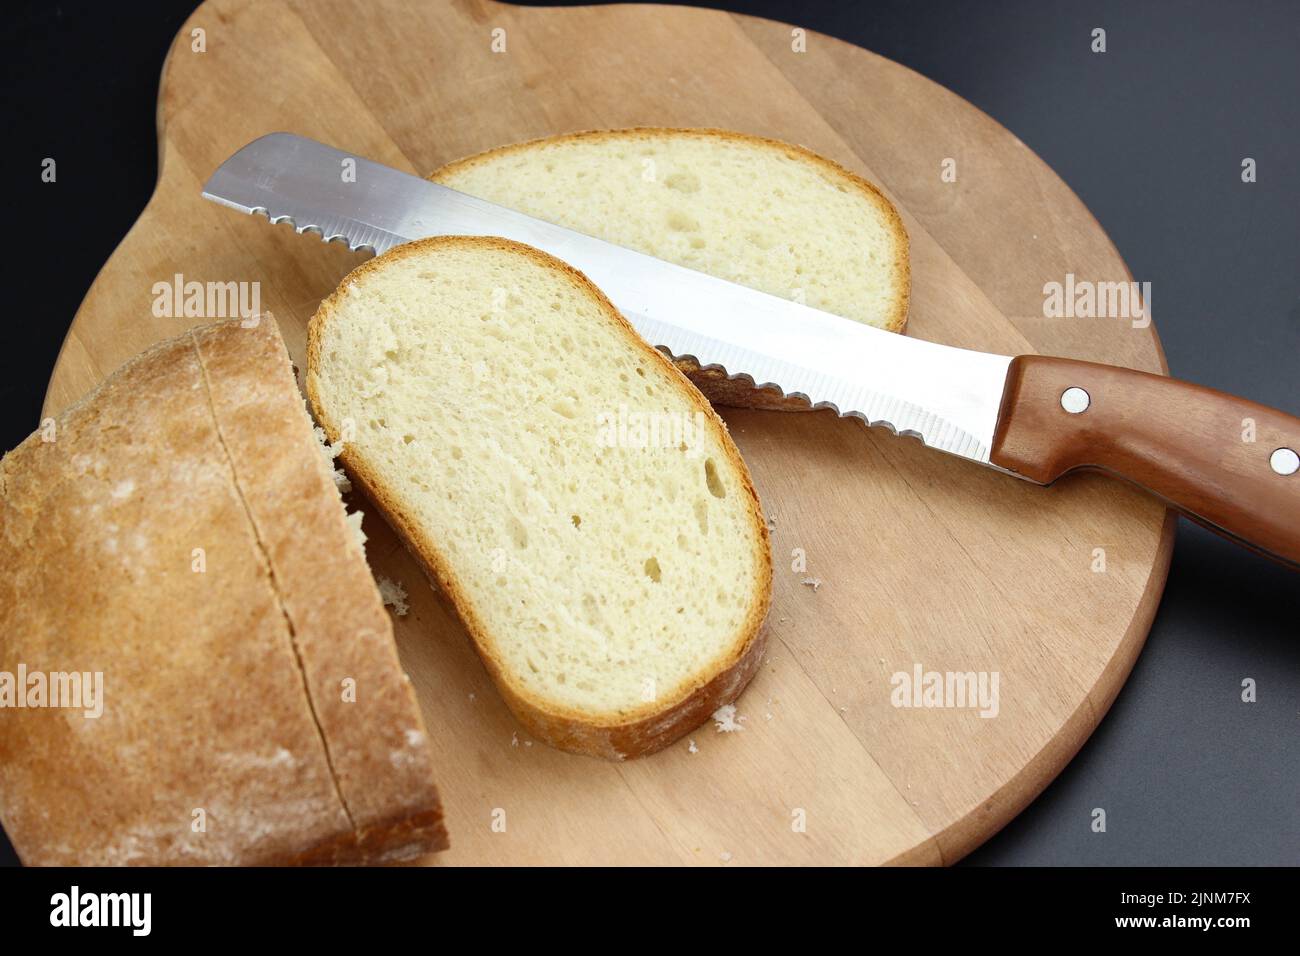 A large knife cuts thin pieces of white bread from a rectangular loaf Stock Photo